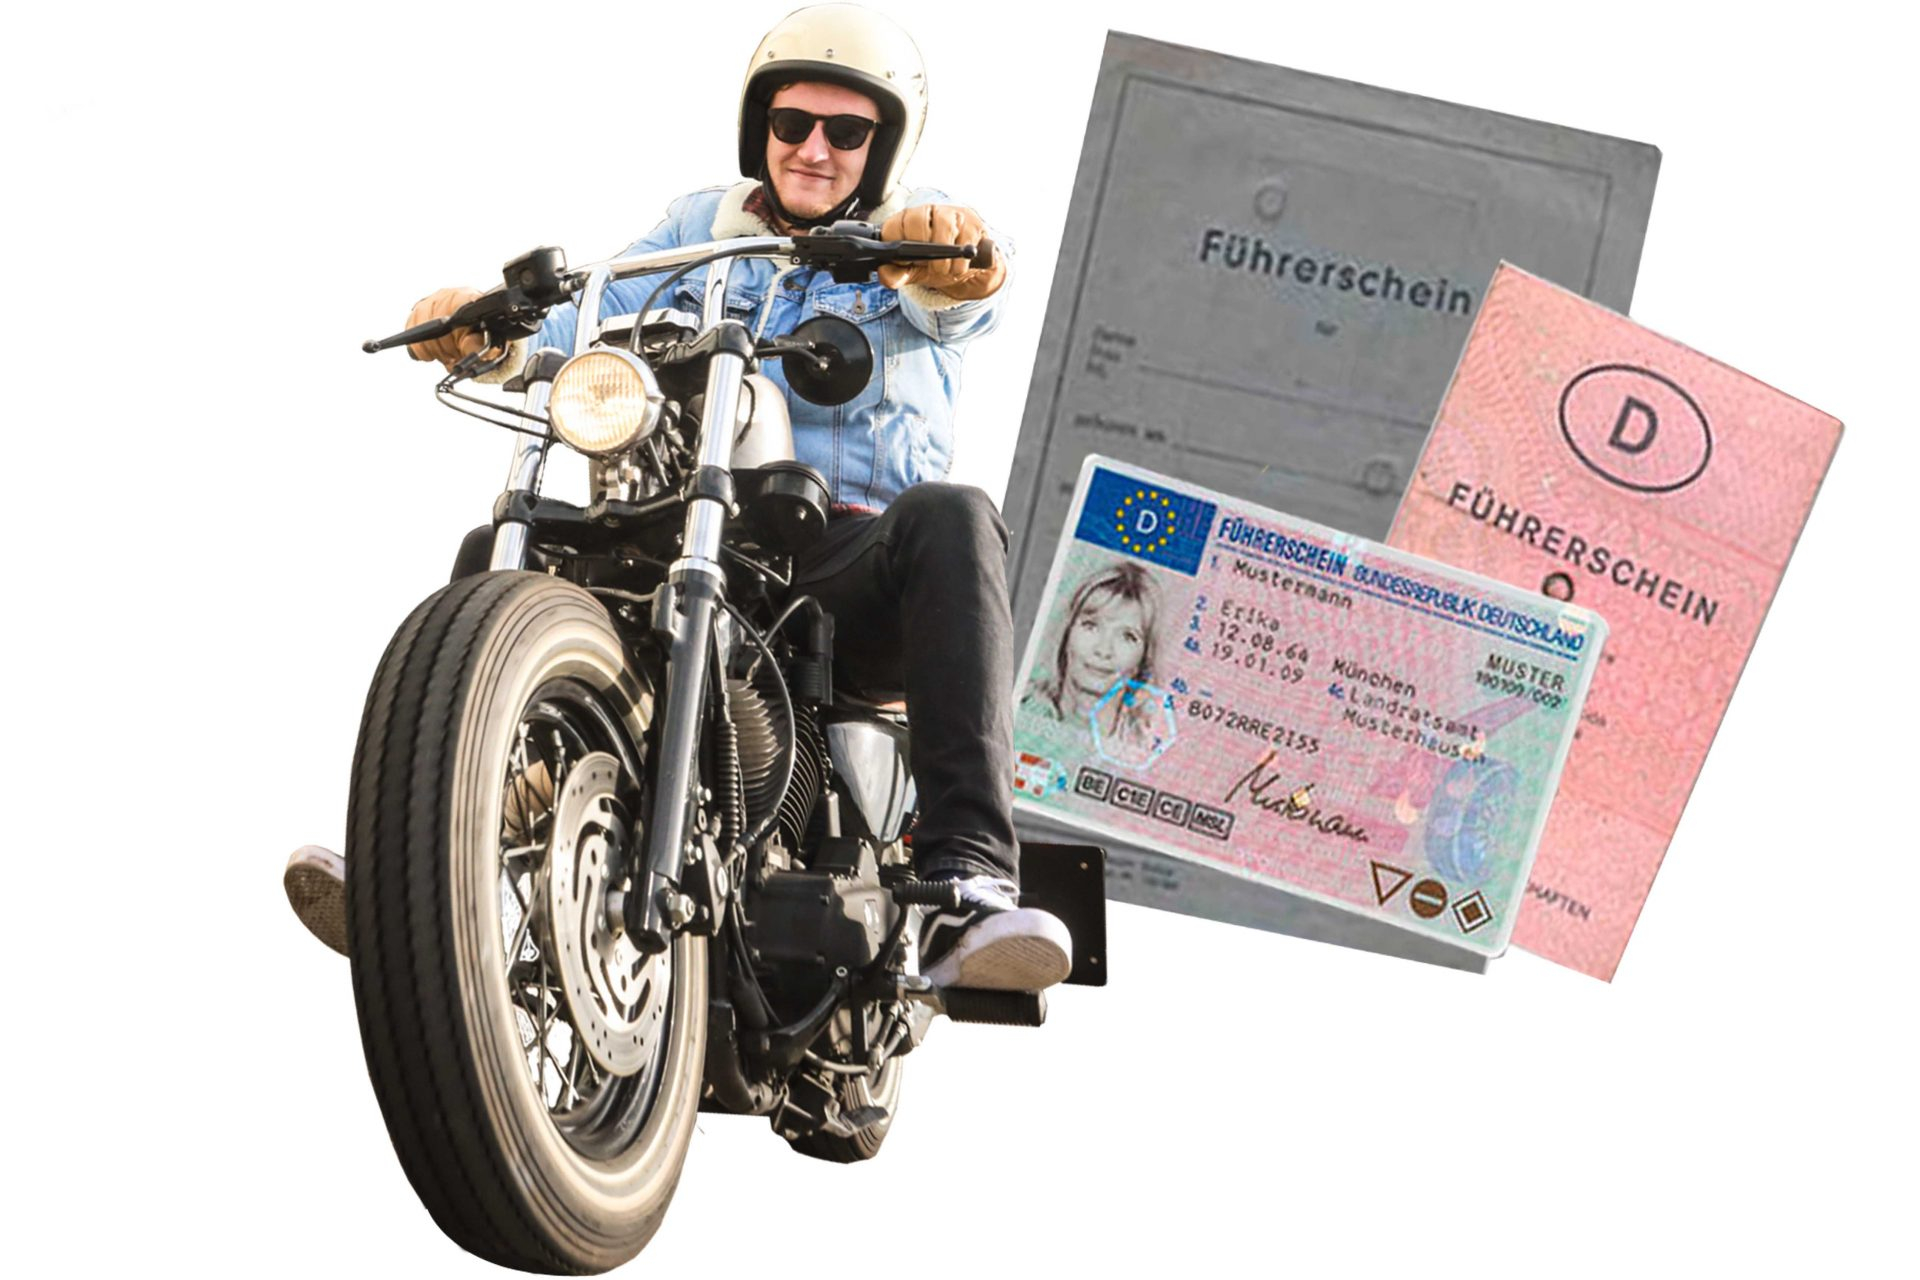 Motorcycle Driving Licence Everything About The Licence throughout sizing 1920 X 1280